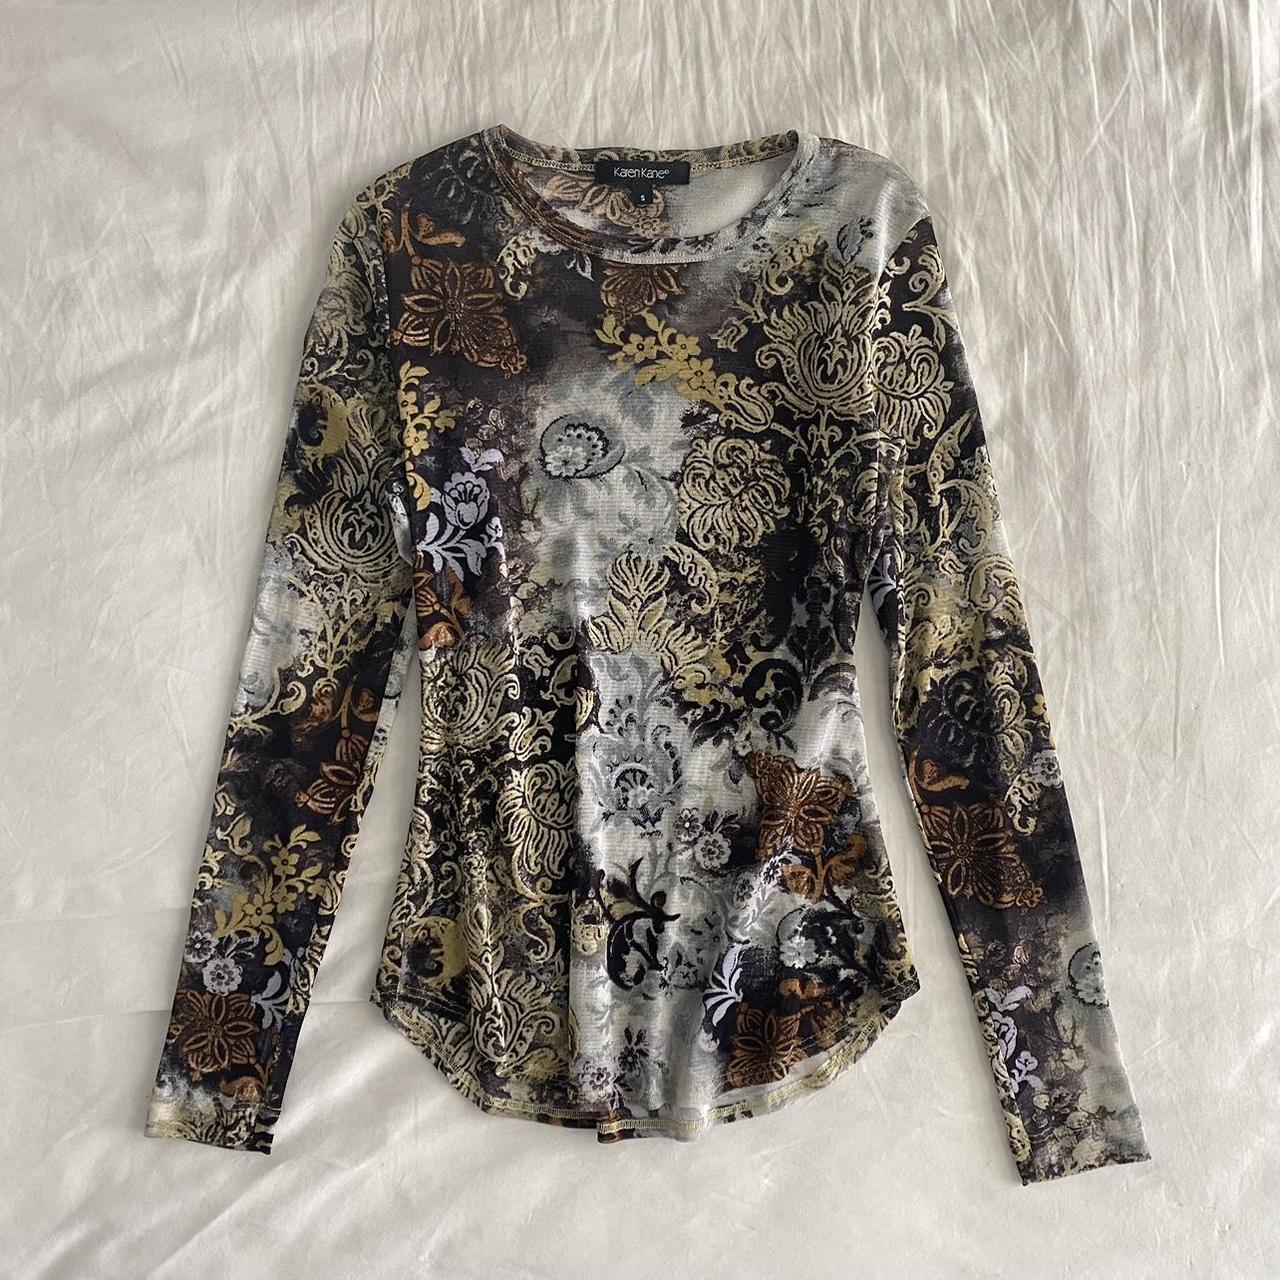 item listed by thrift_gf